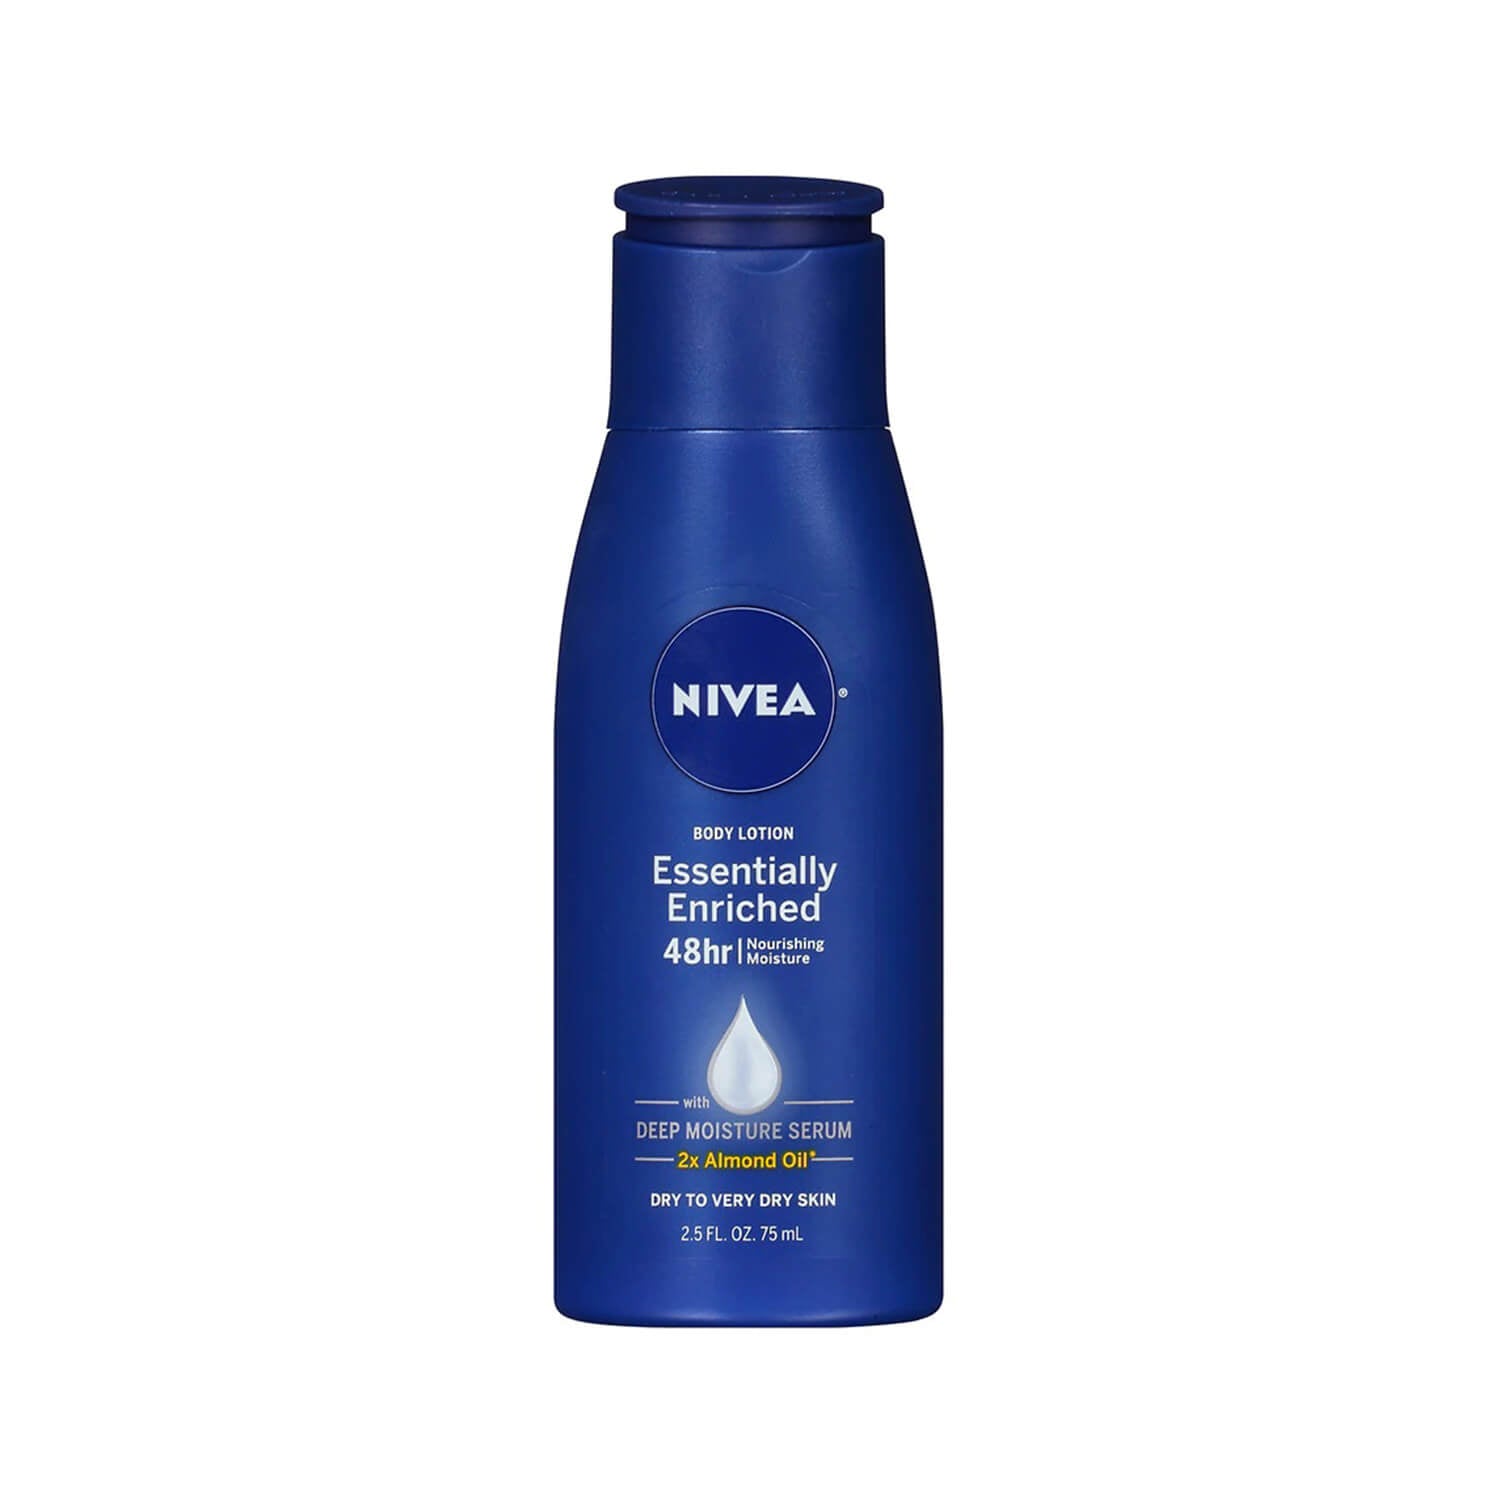 nivea body lotion travel size available for delivery in Karachi, Lahore, Islamabad in Pakistan